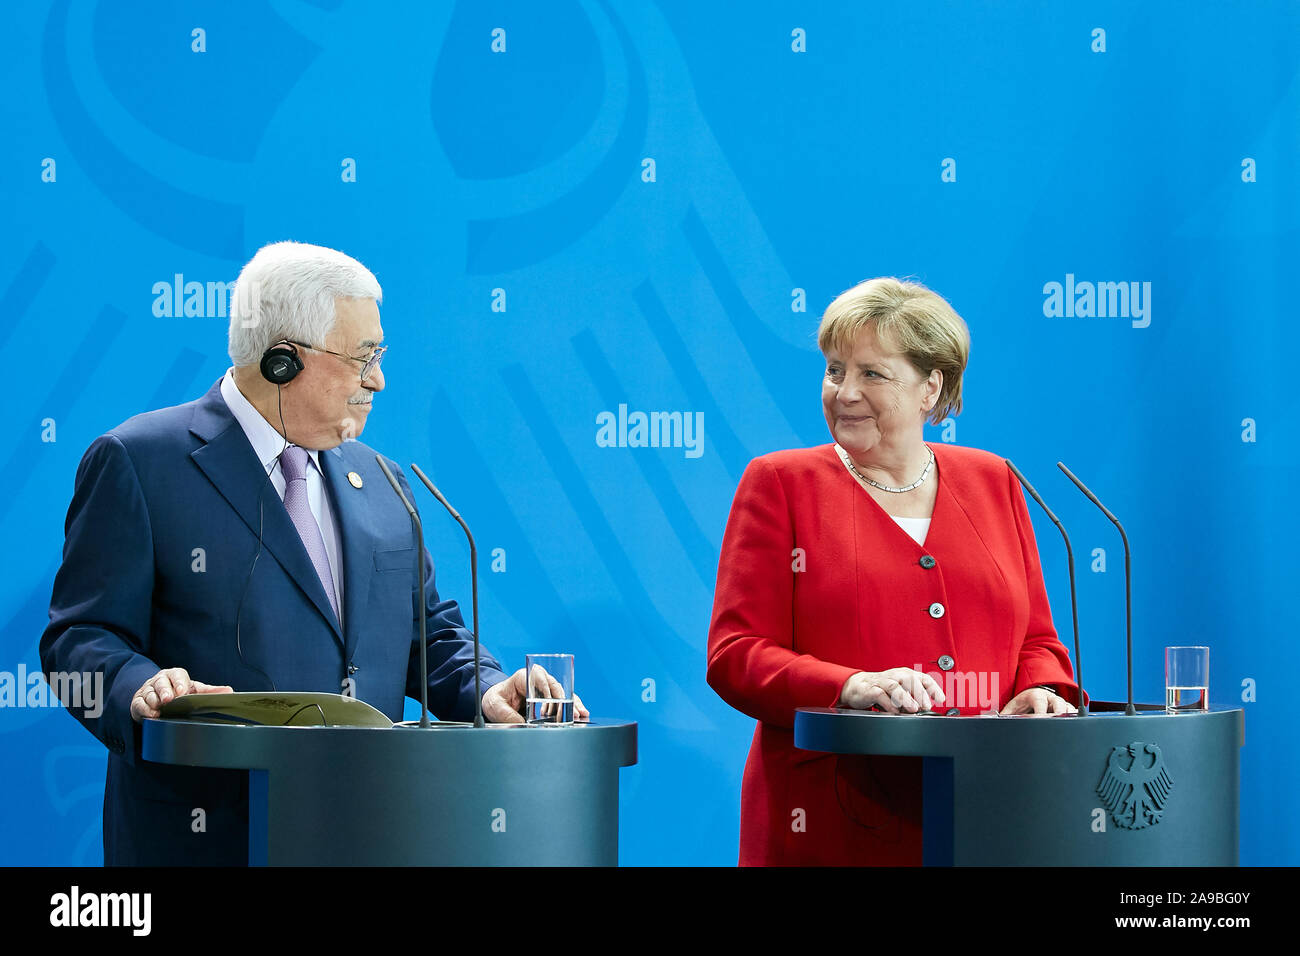 29.08.2019, Berlin, Berlin, Germany - Chancellor Angela Merkel and Mahmoud Abbas, President of the Palestinian Authority at the joint press conference Stock Photo